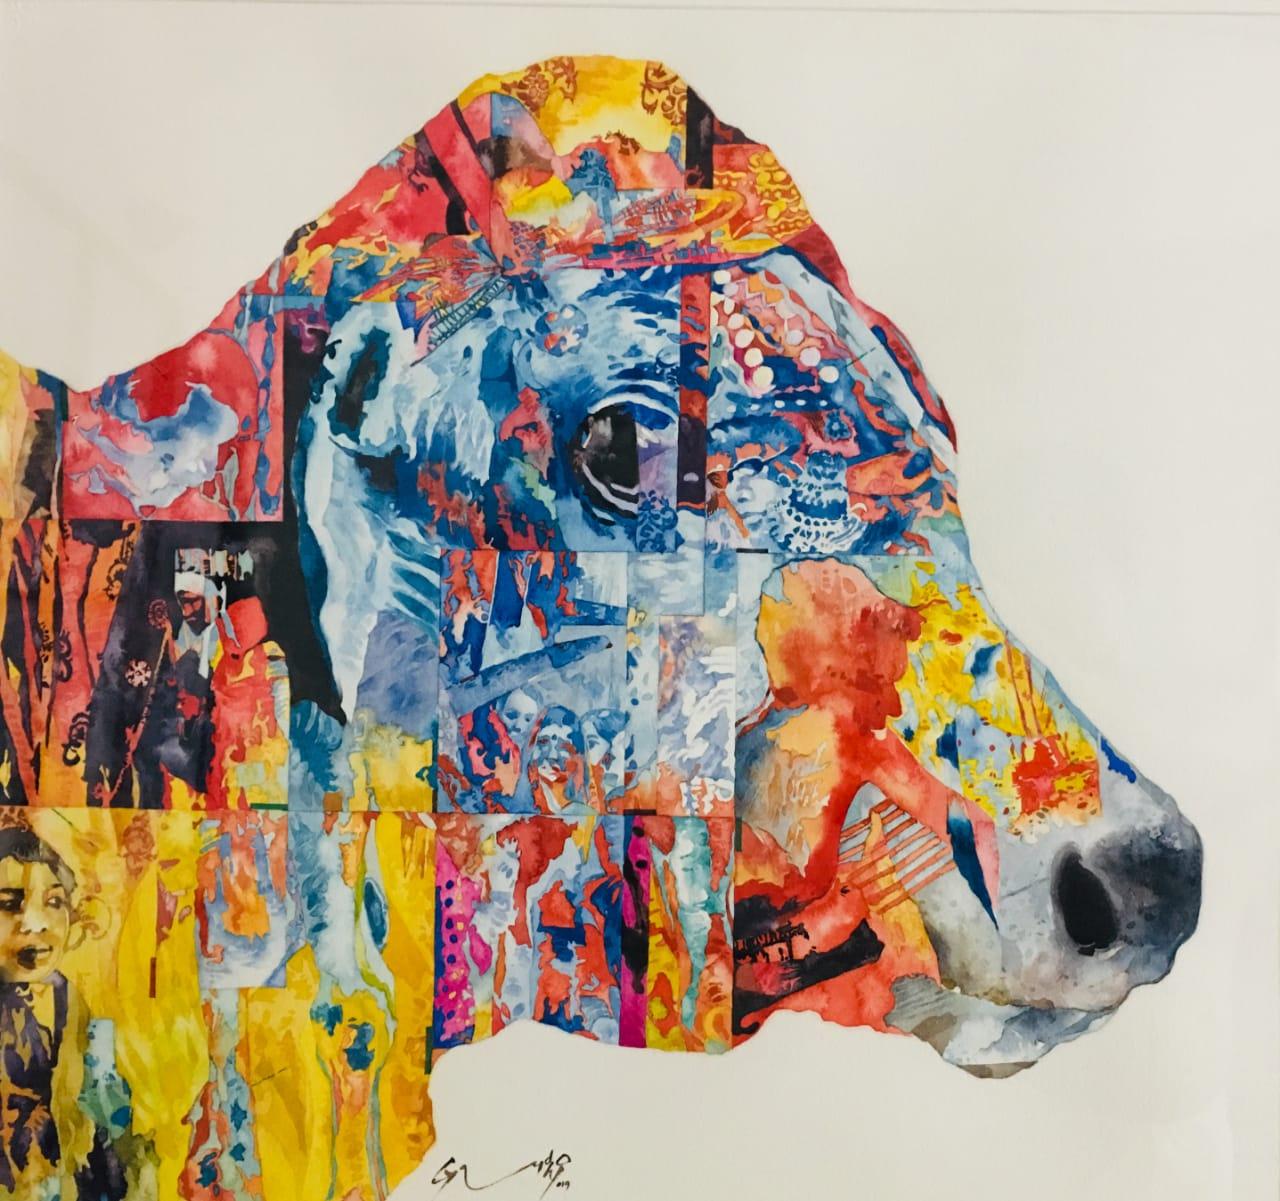 Steven Gandhi Animal Painting - Cow, Watercolour on Paper by Indian Contemporary Artist "In Stock"